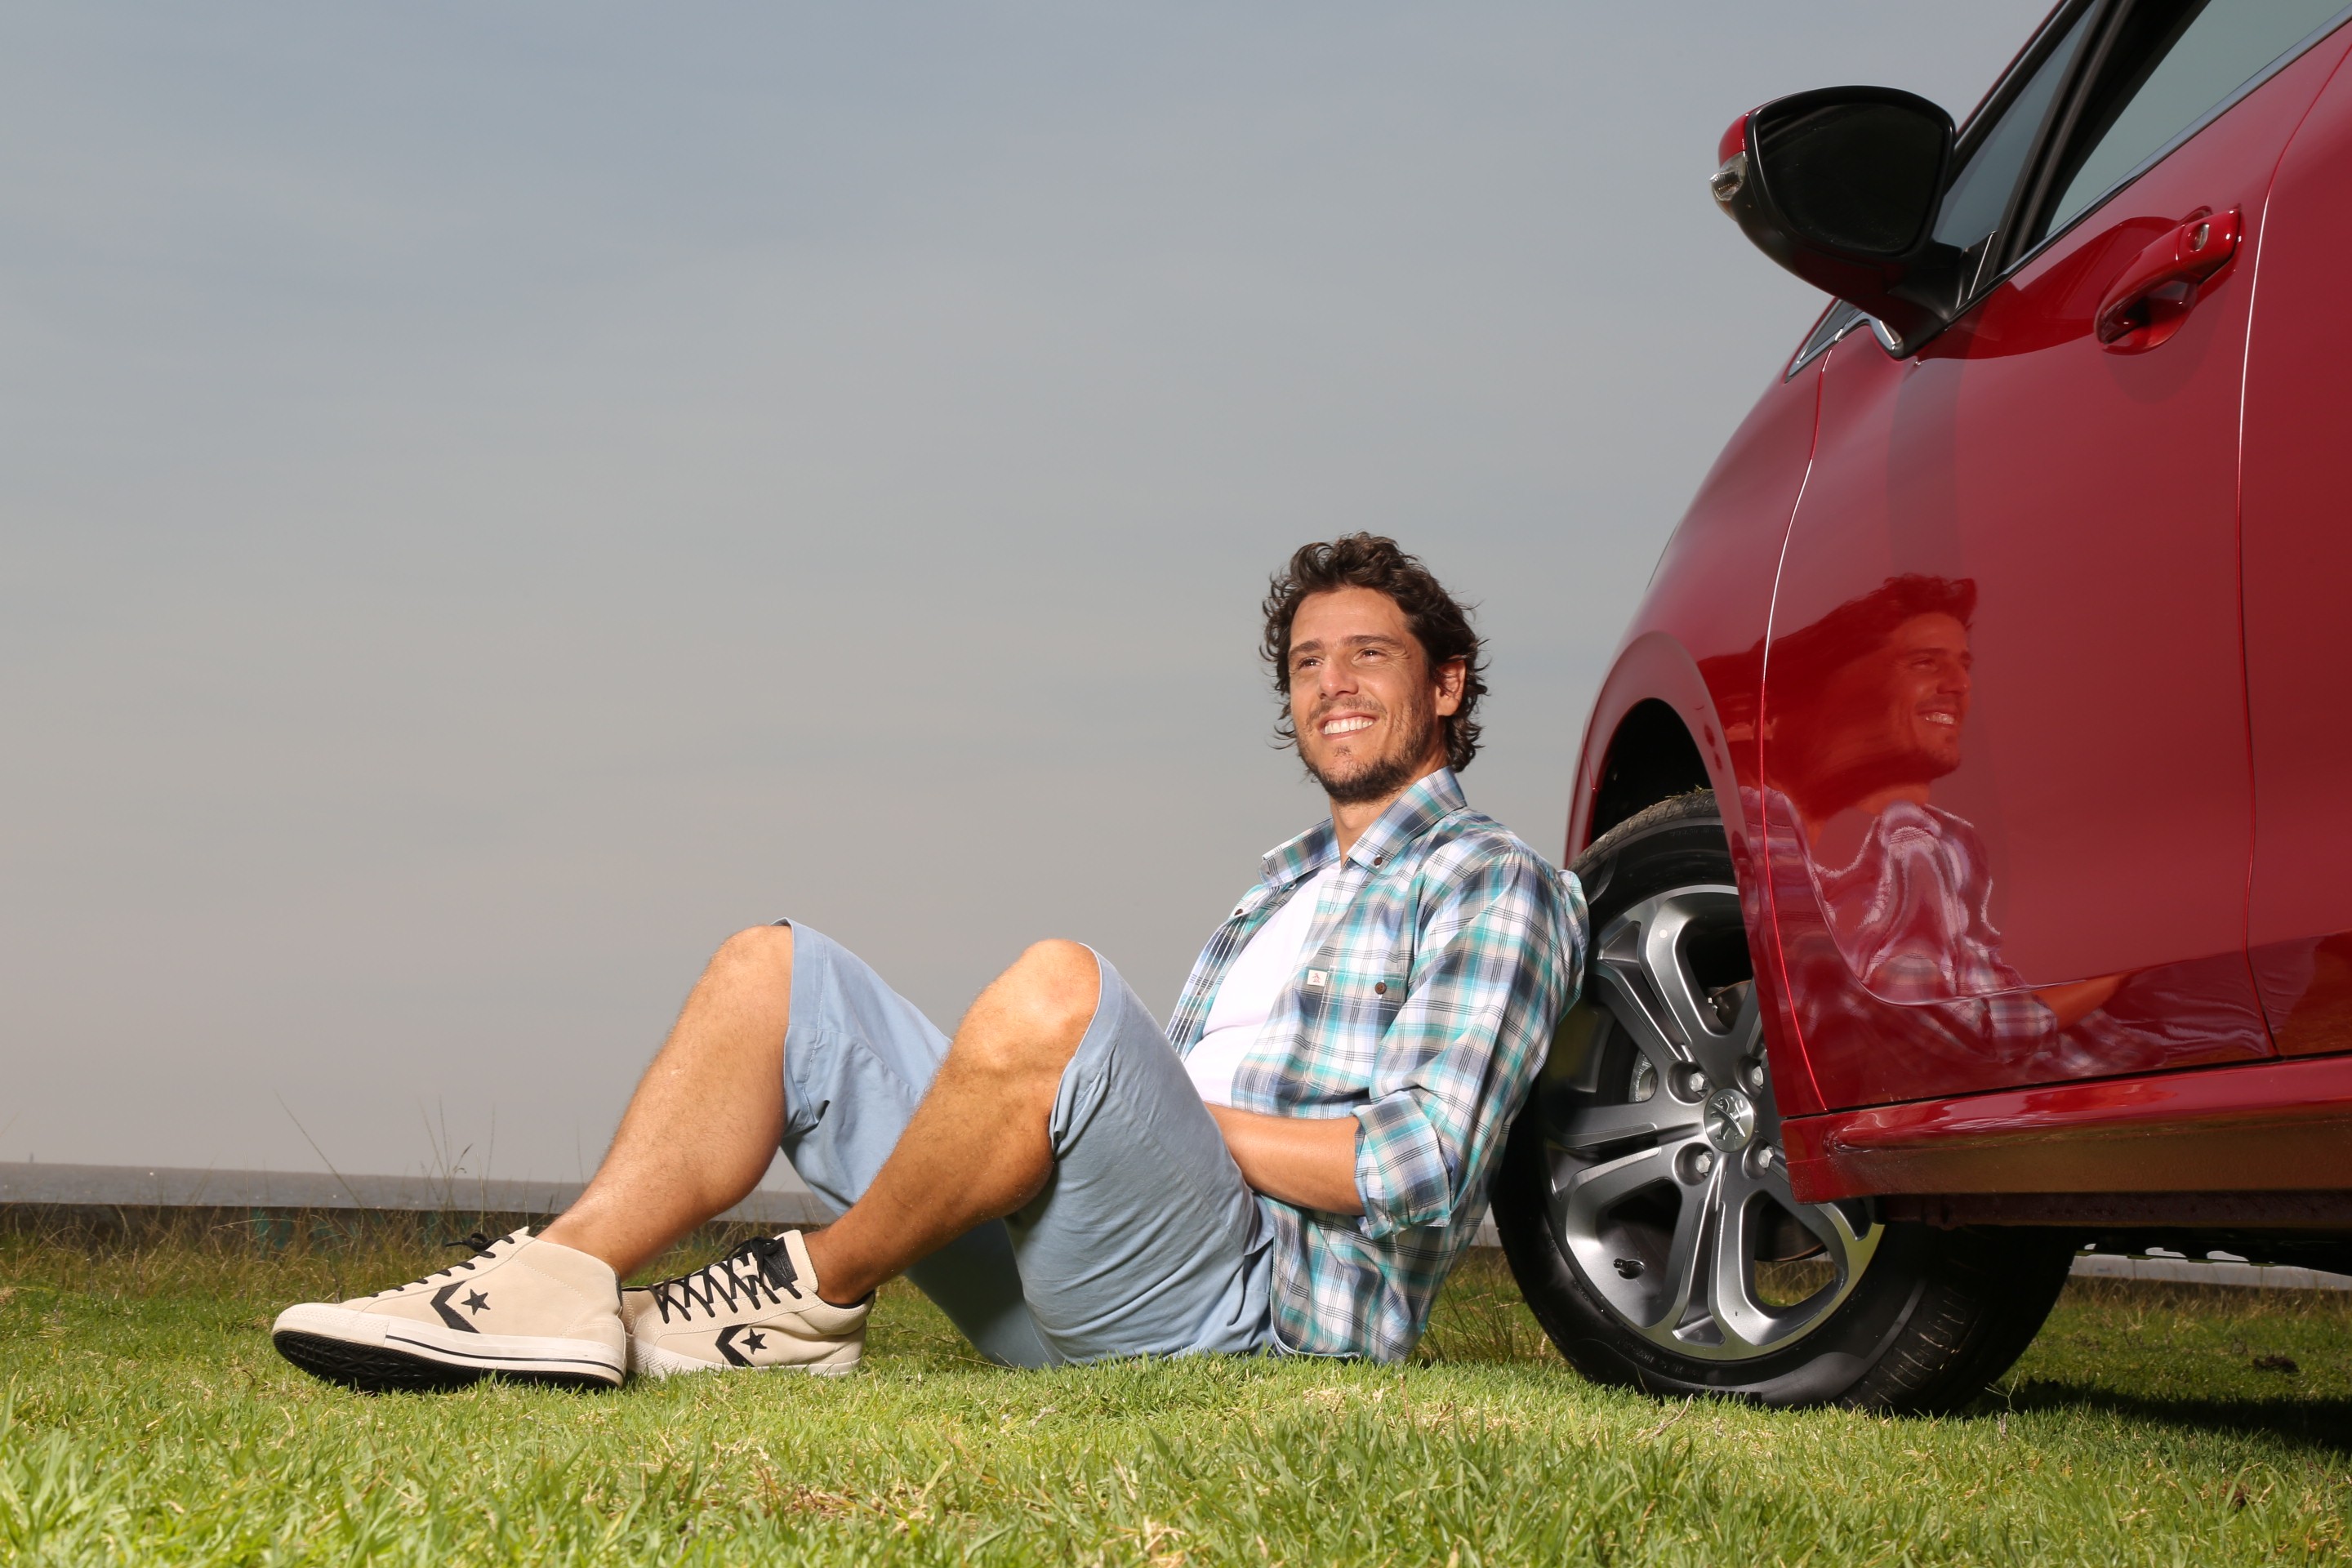 People 2880x1920 men car red cars grass men with cars smiling vehicle